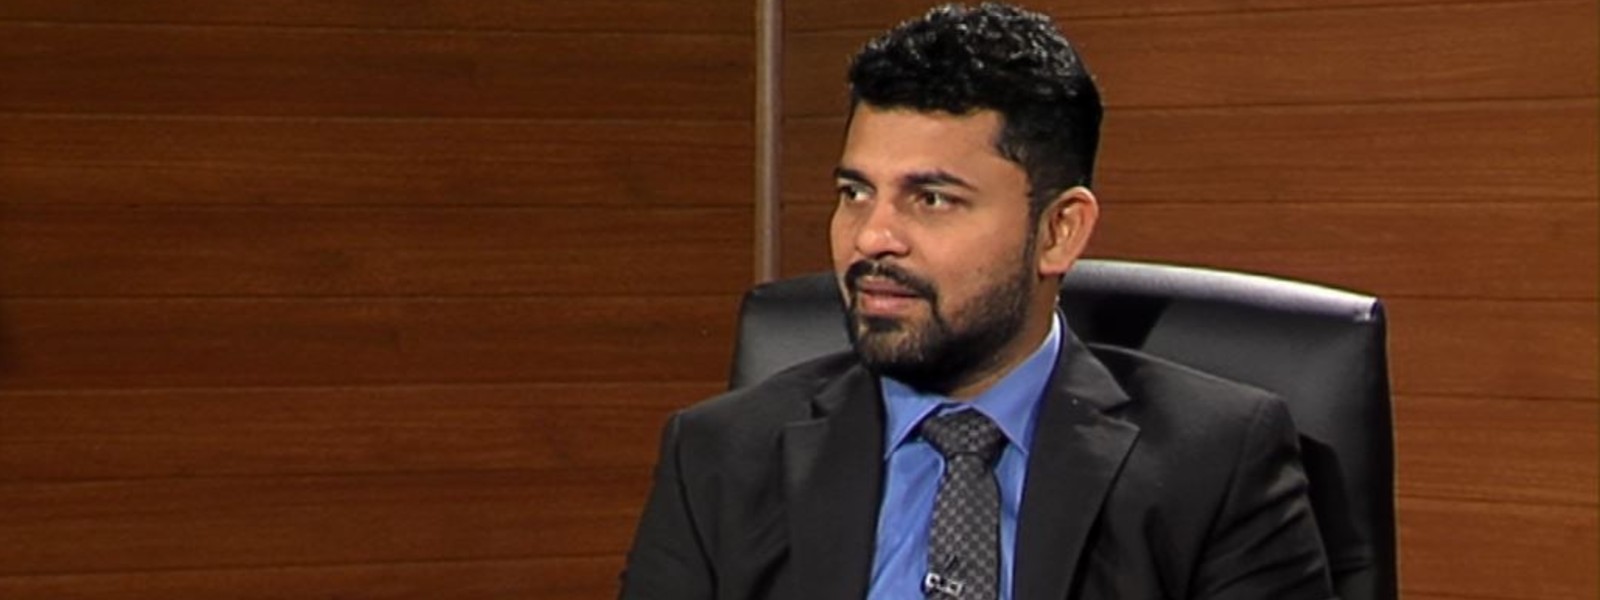 Muszhaaraff defends decision on Dual Citizenship